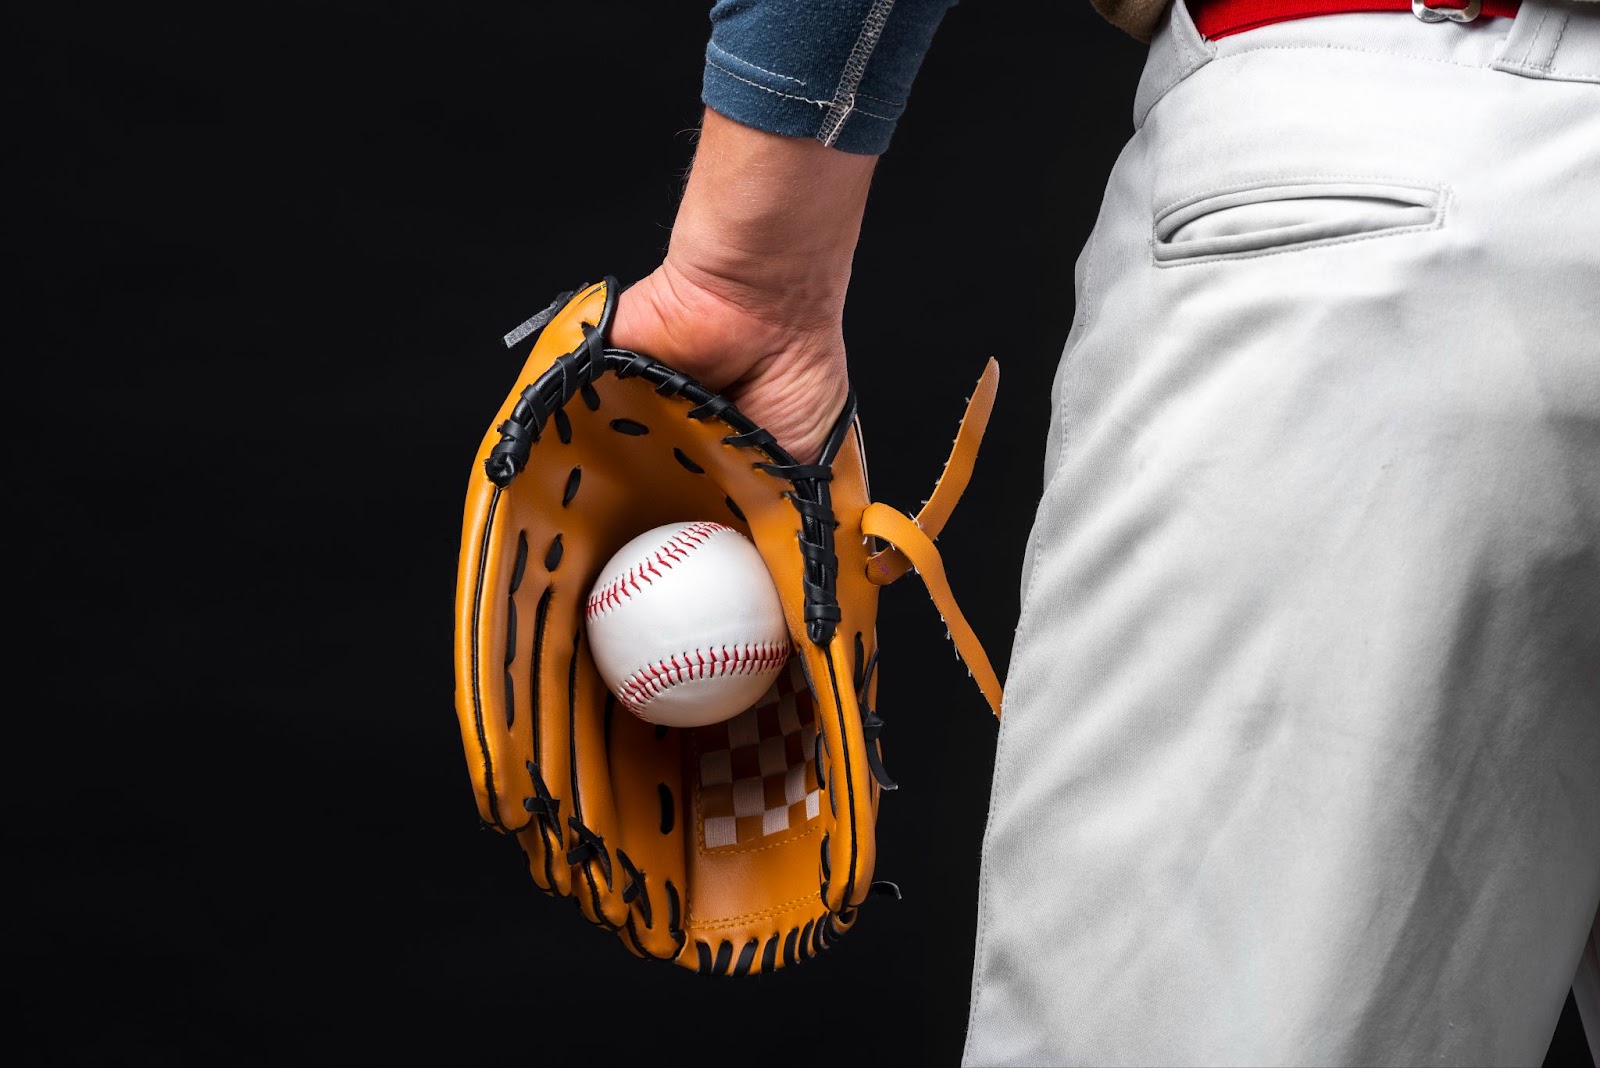 Back view of man holding glove with baseball